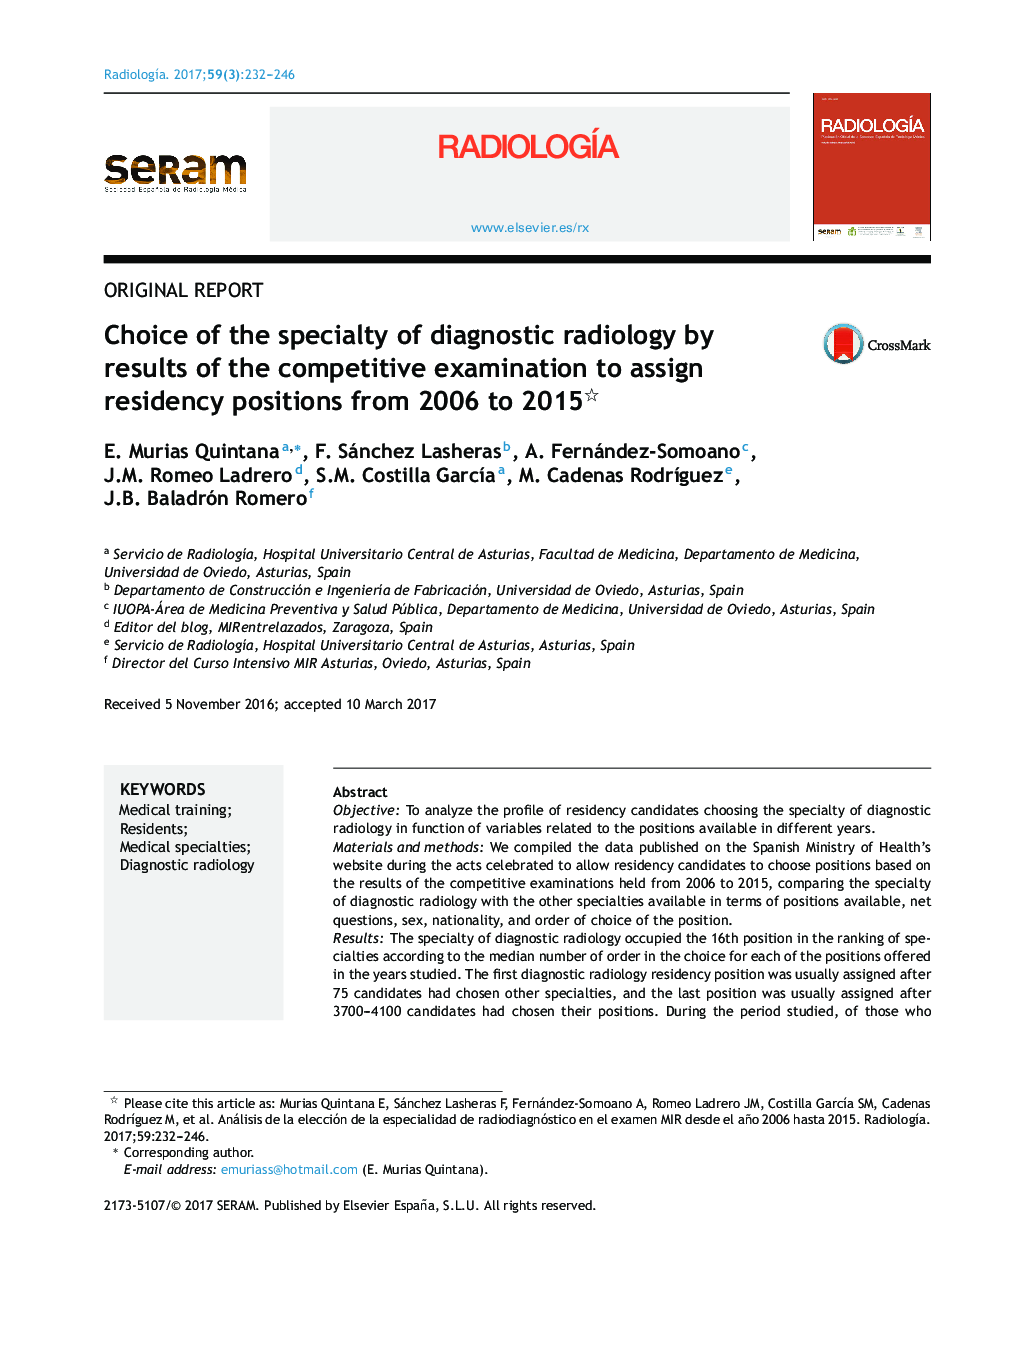 Choice of the specialty of diagnostic radiology by results of the competitive examination to assign residency positions from 2006 to 2015